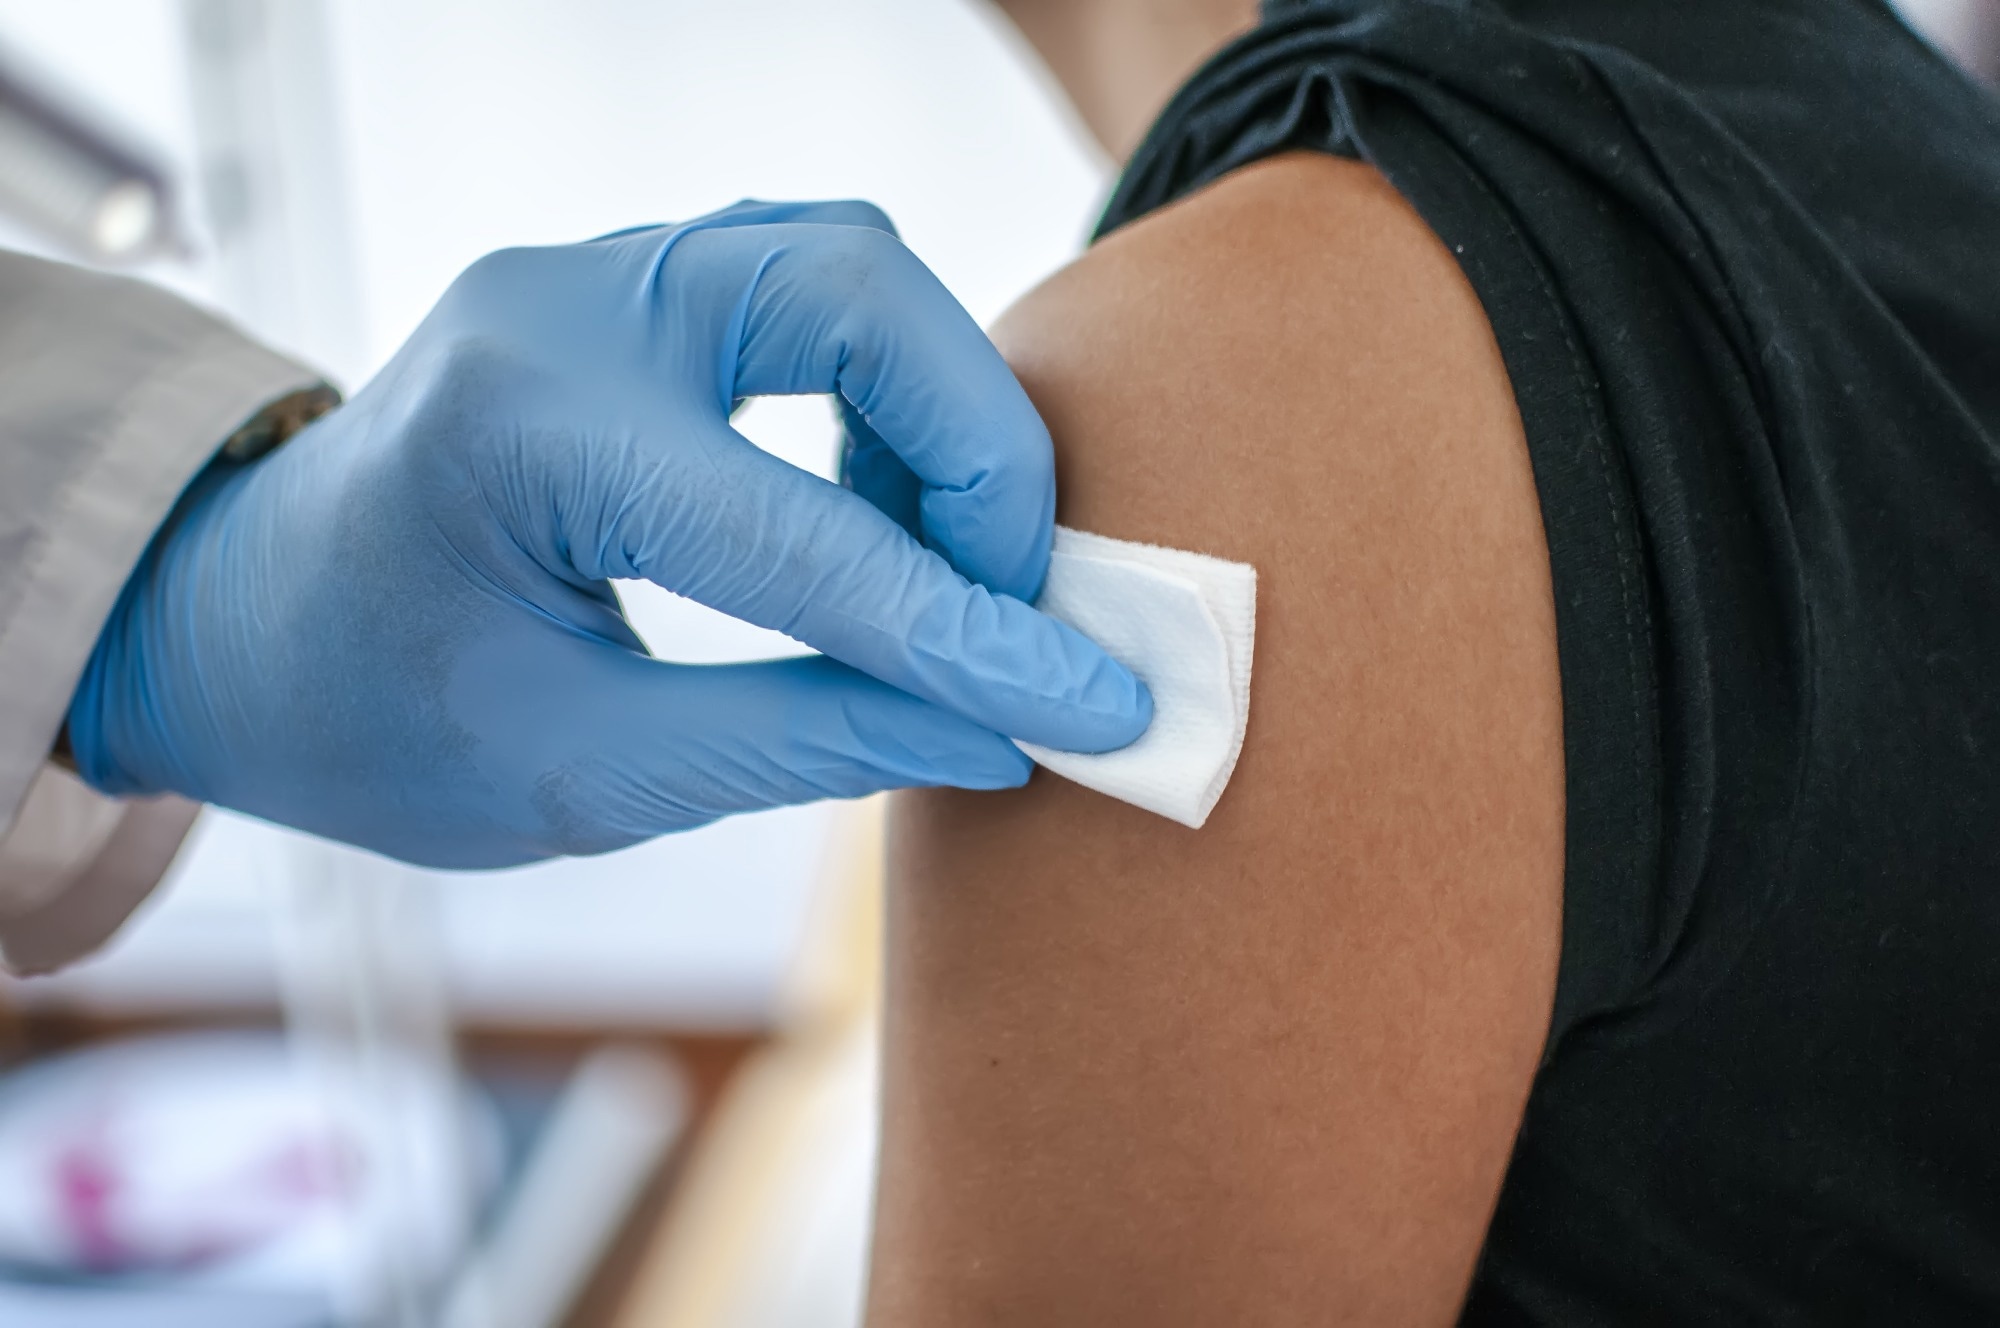 Study: Meningococcal ACWYX Conjugate Vaccine in 2-to-29-Year-Olds in Mali and Gambia. Image Credit: xelaway/Shutterstock.com